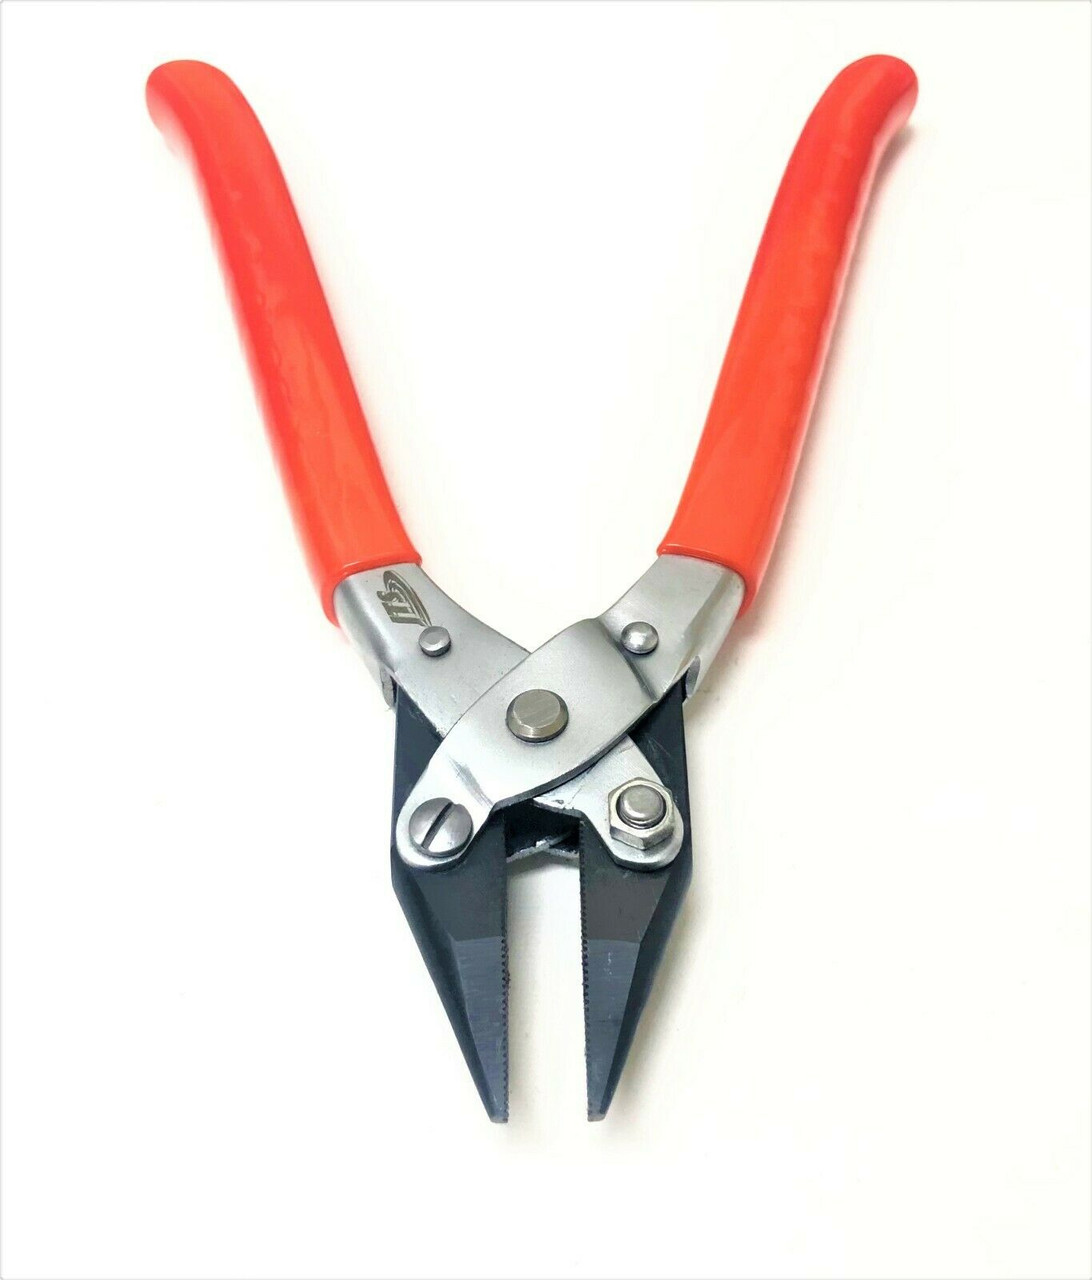 8" Parallel Action Chain Nose Pliers Serrated Jaw with PVC Handles Coated 200mm